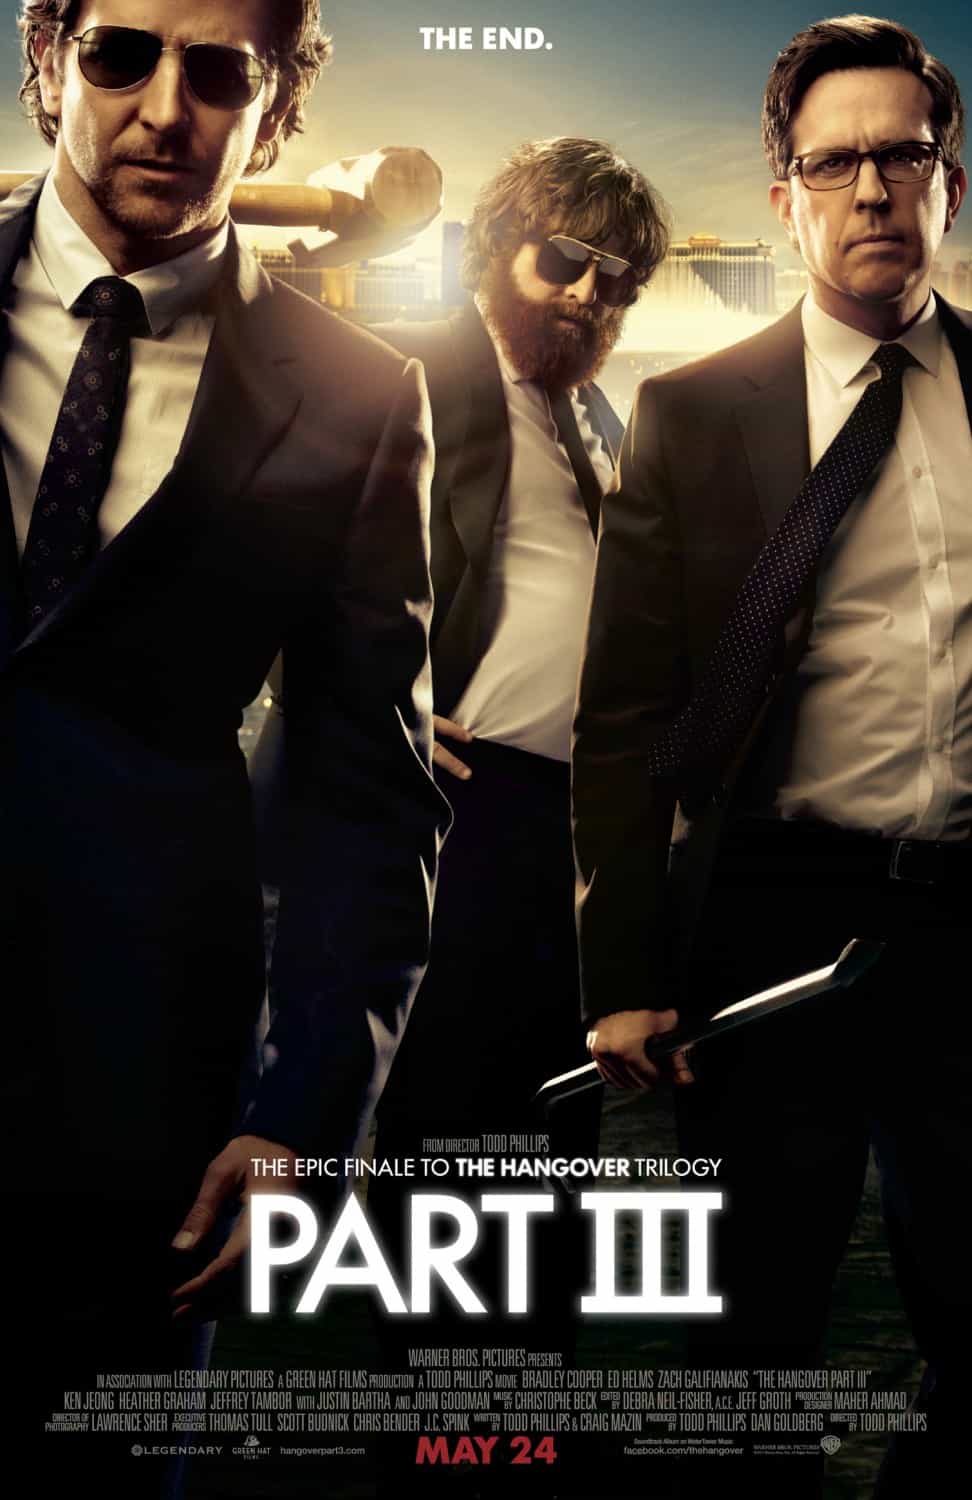 UK Box Office report, 31 May: Hangover 3 leads the way for static top 5